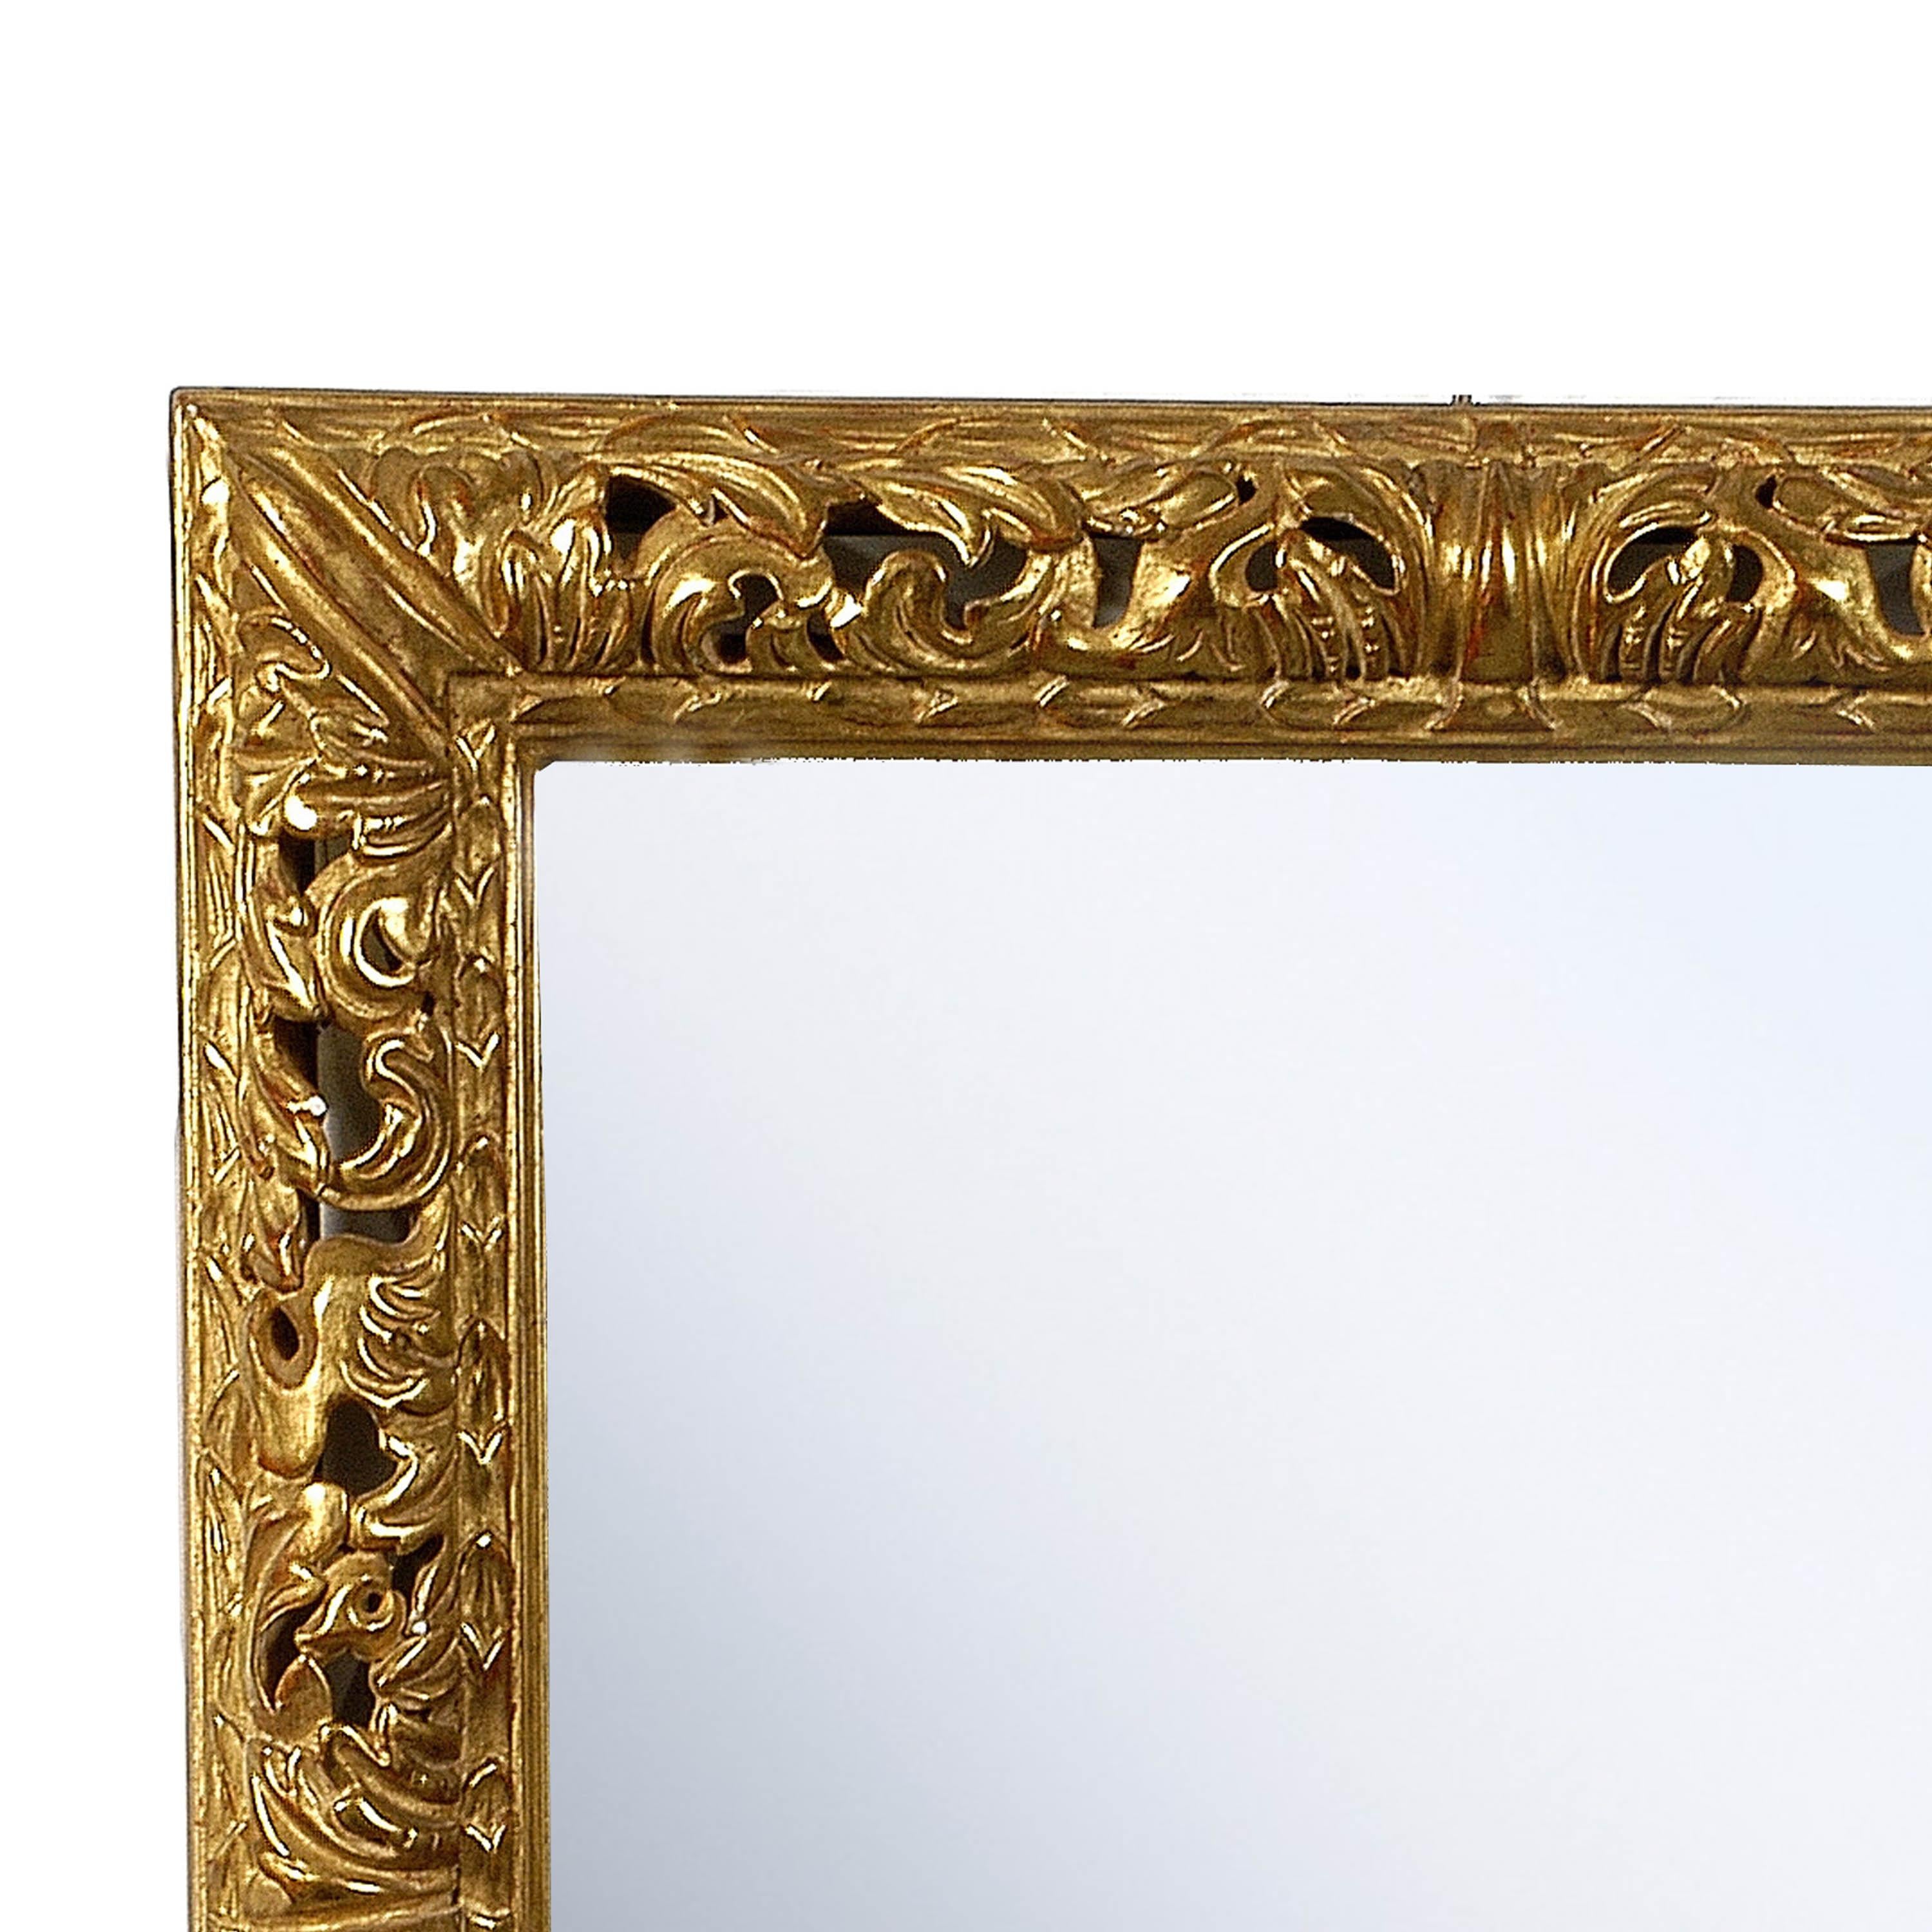 Neoclassical Empire rectangular handcrafted mirror. Rectangular hand carved wooden structure with gold foil finished, Spain, 1970.